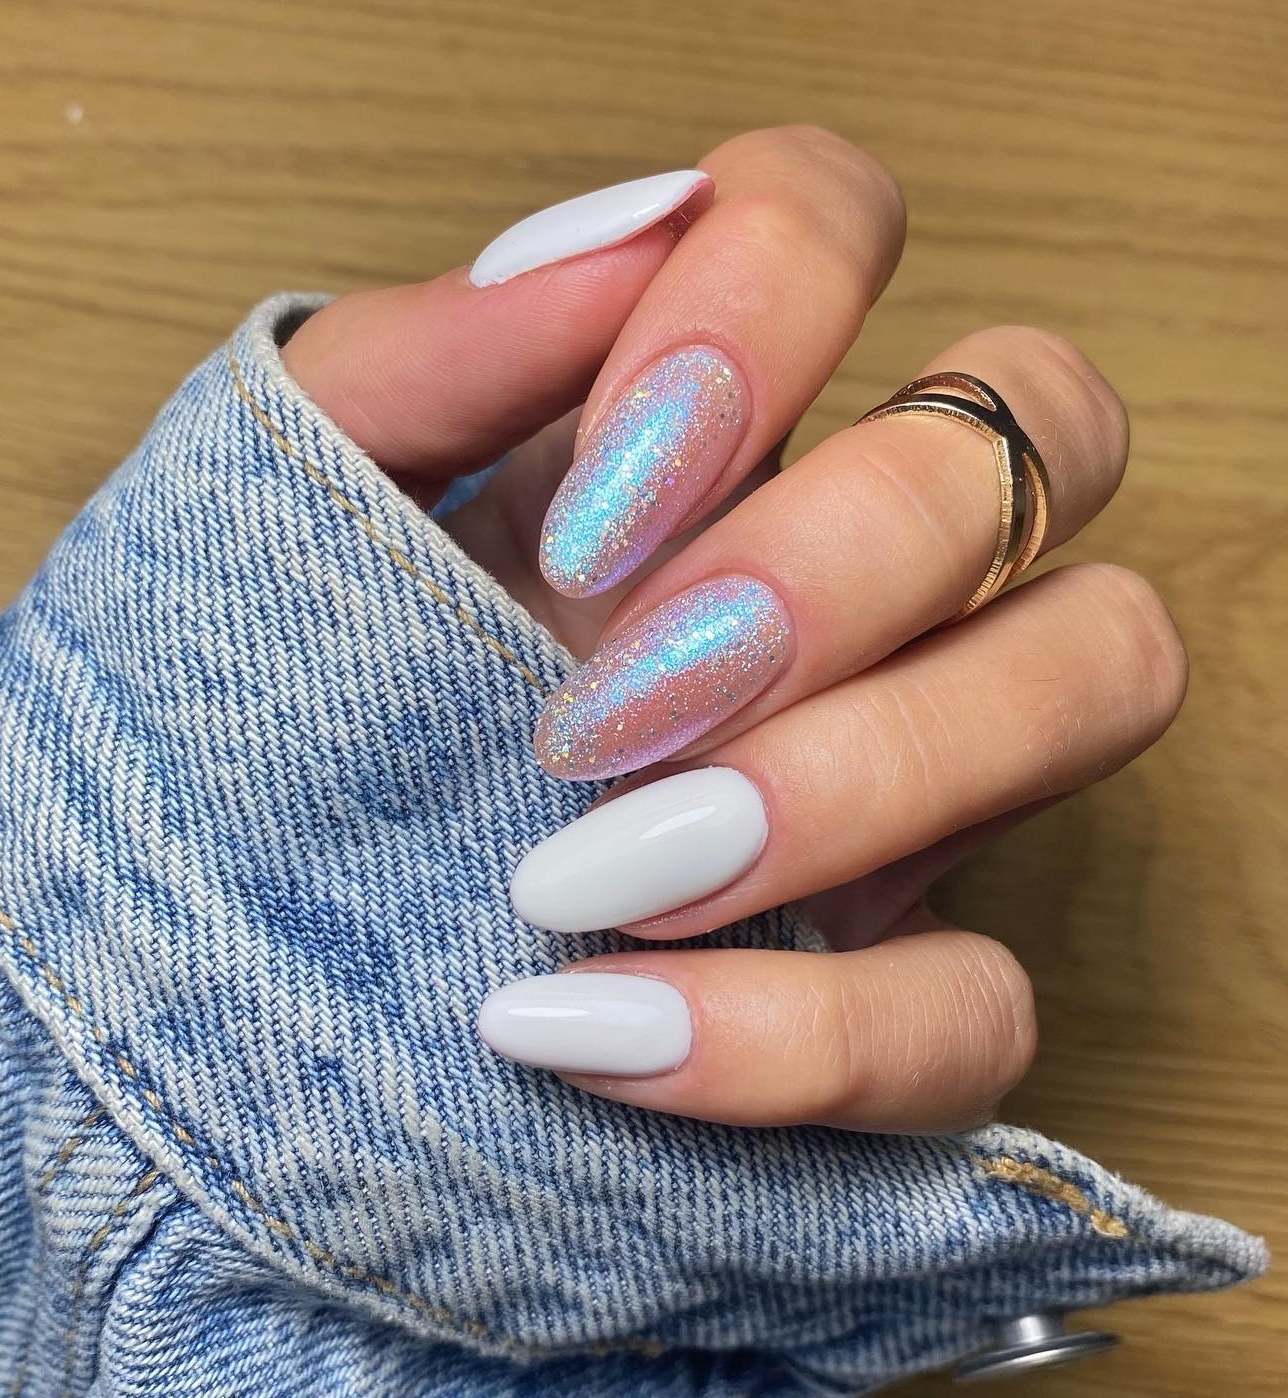 White Almond Nails with Blue Glitter